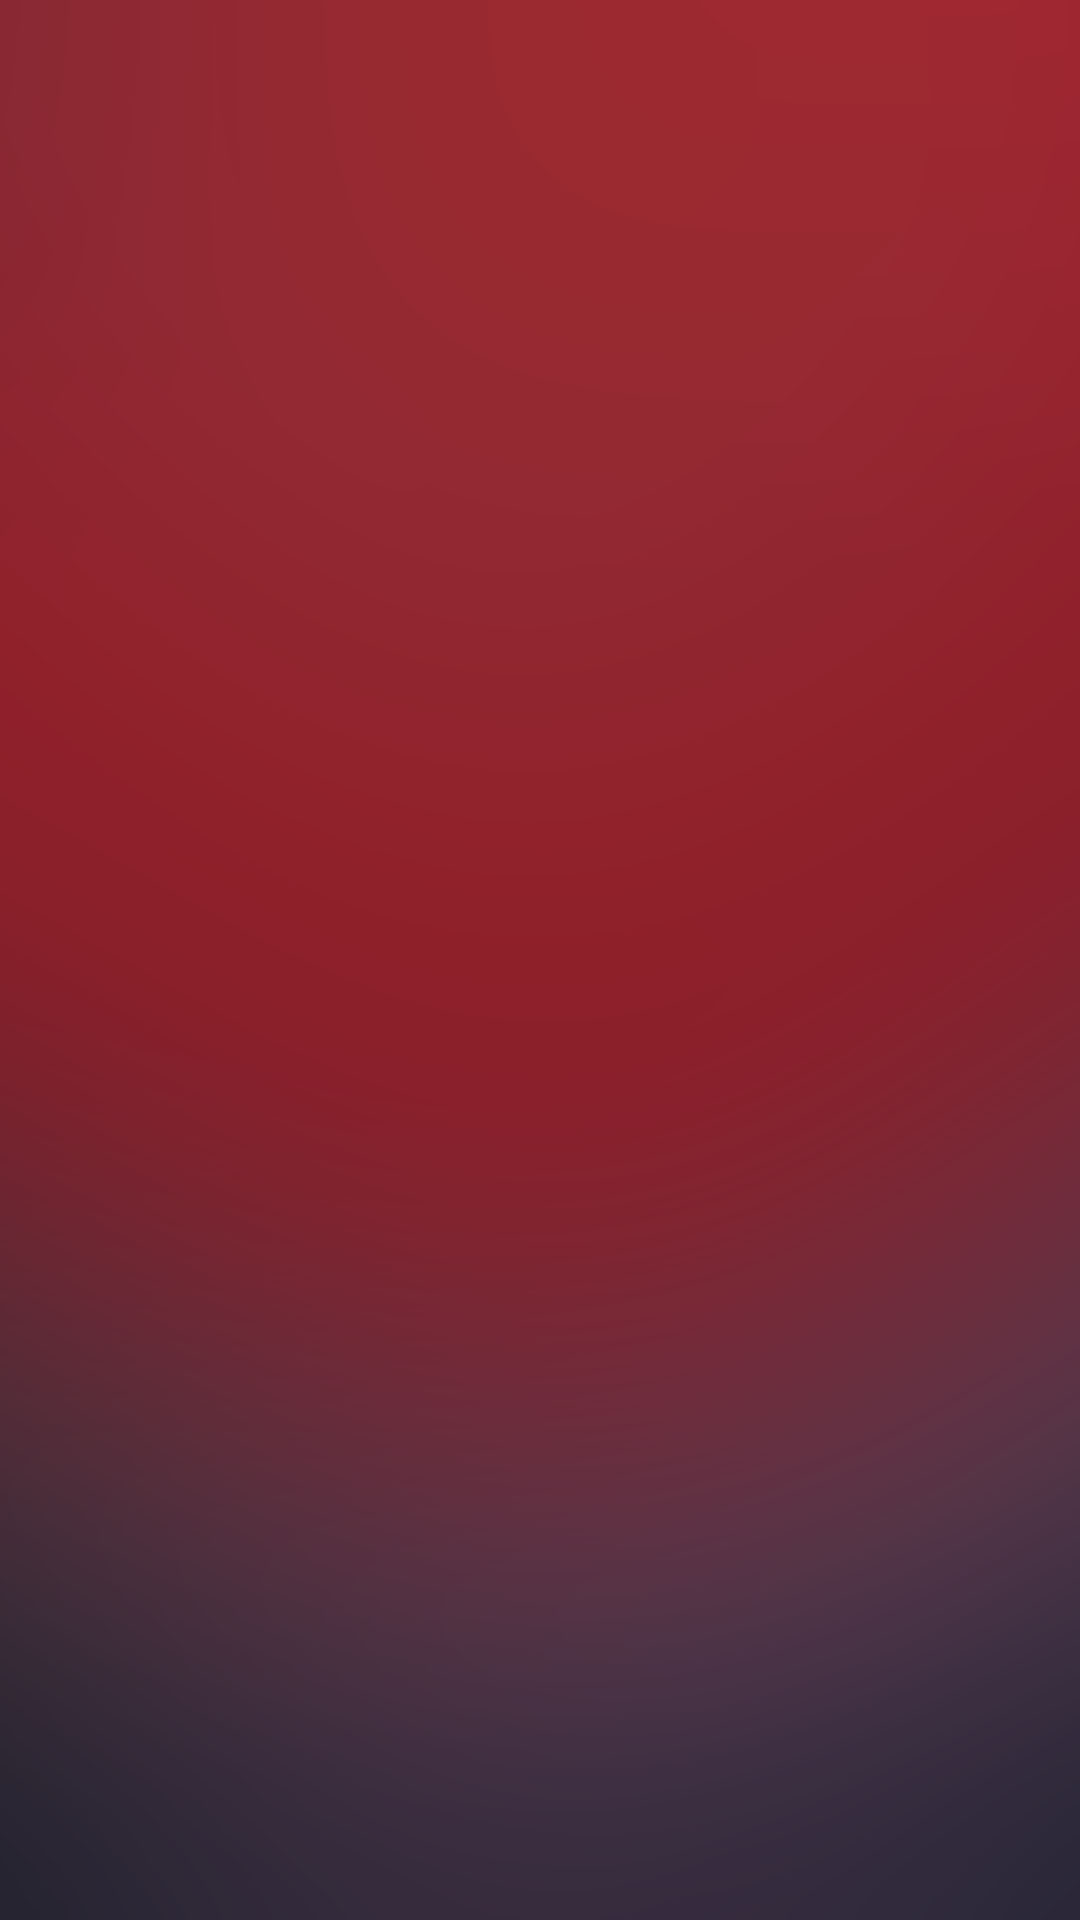 1080x1920 Dark Red Gradient Simple Android Wallpaper ...